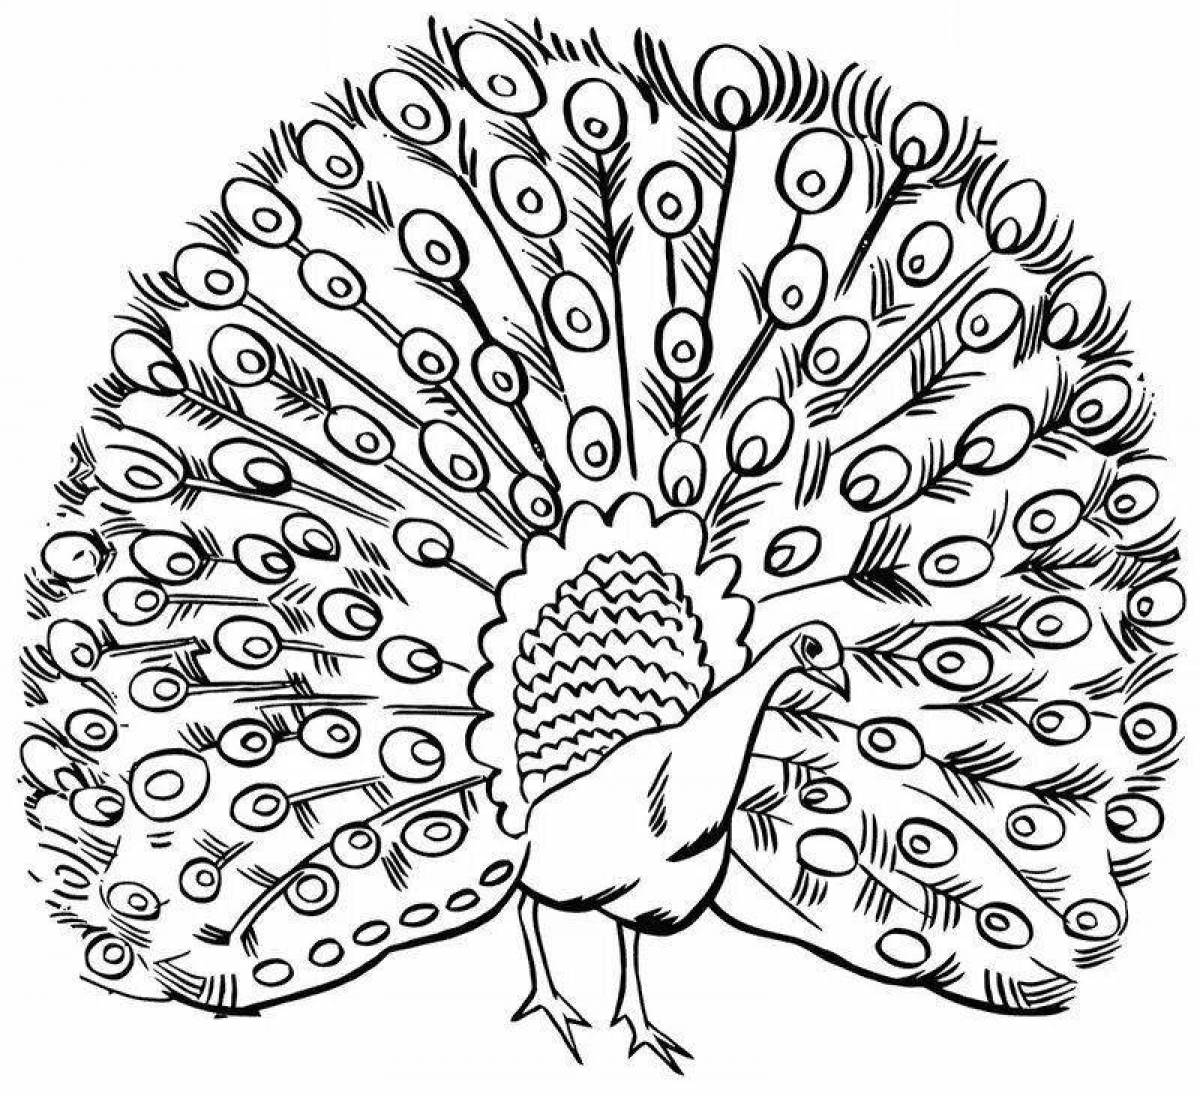 Awesome peacock coloring book